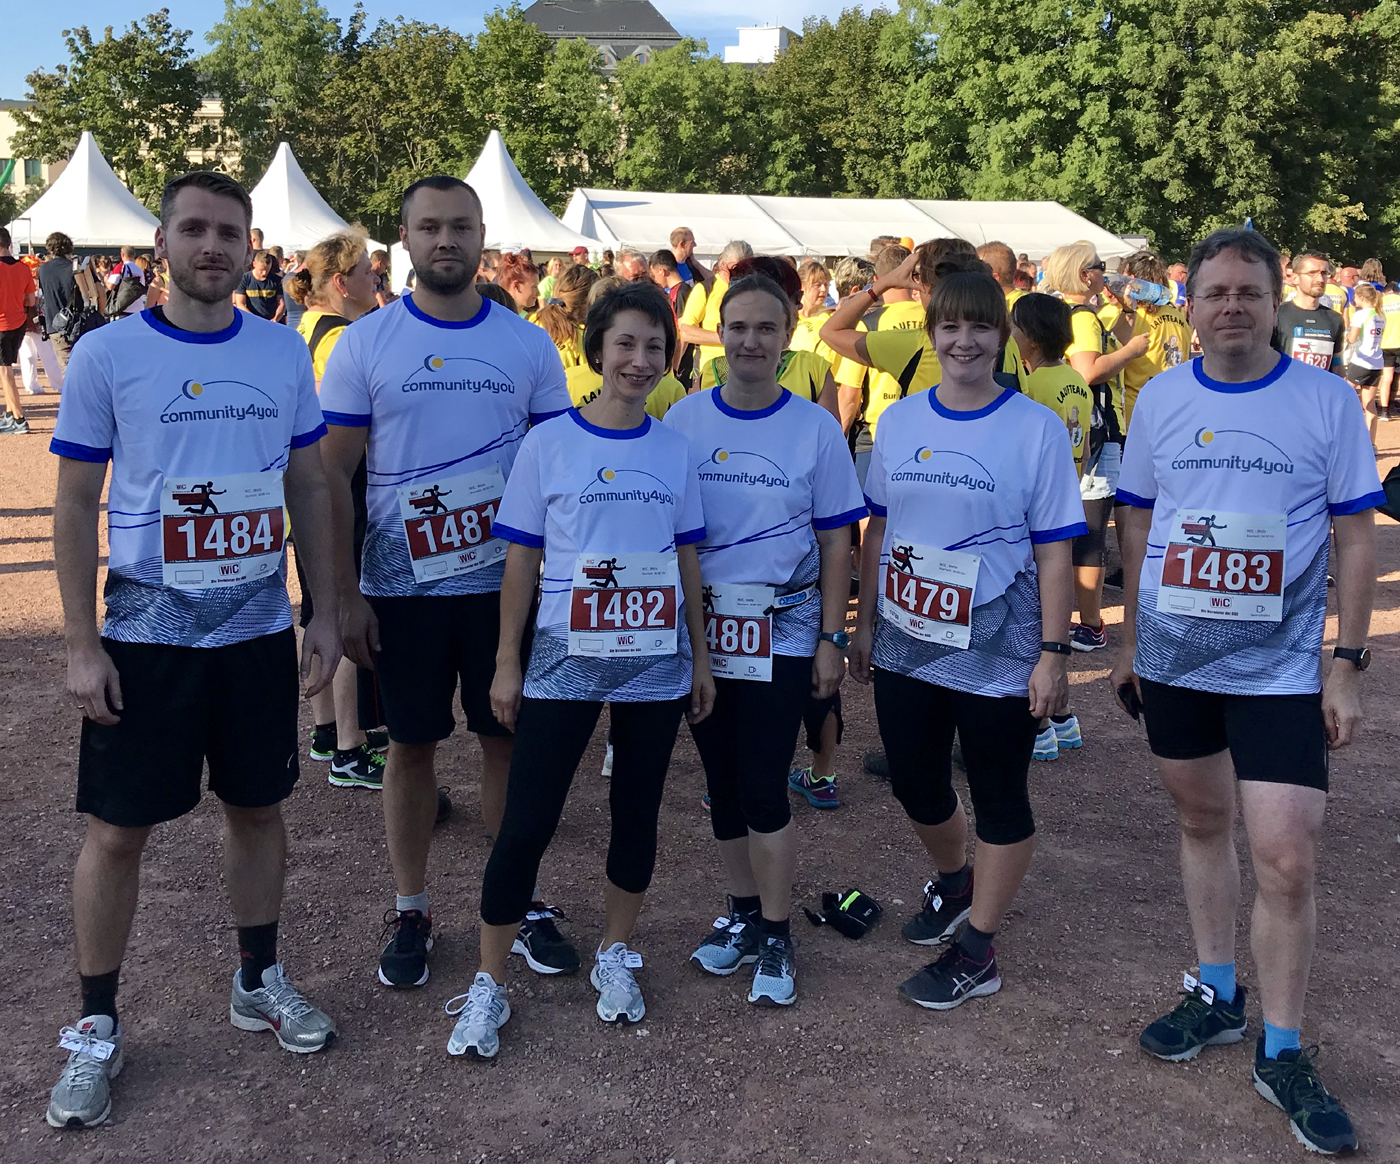 Company run 2019 in Chemnitz: community4you AG in its top sporty shape | community4you AG team participated in the 4.8 km long-distance running on September 4th.